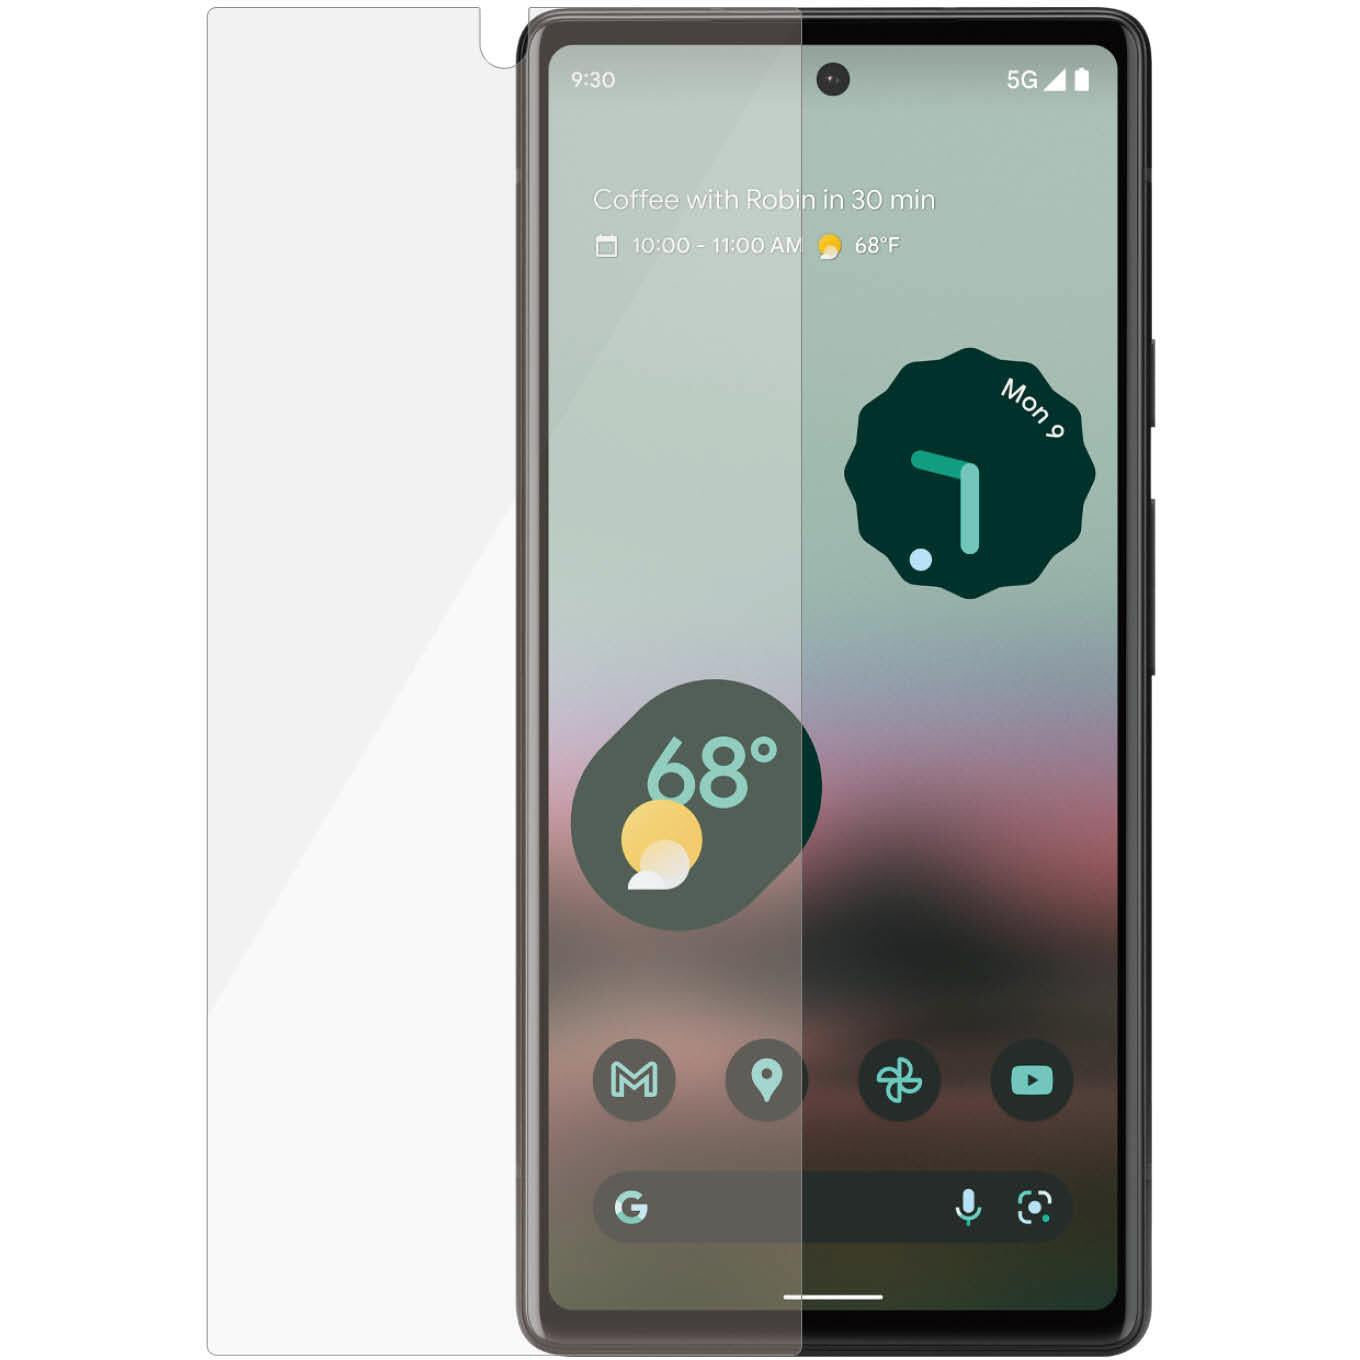 panzerglass case frieldly screen protector for pixel 6a